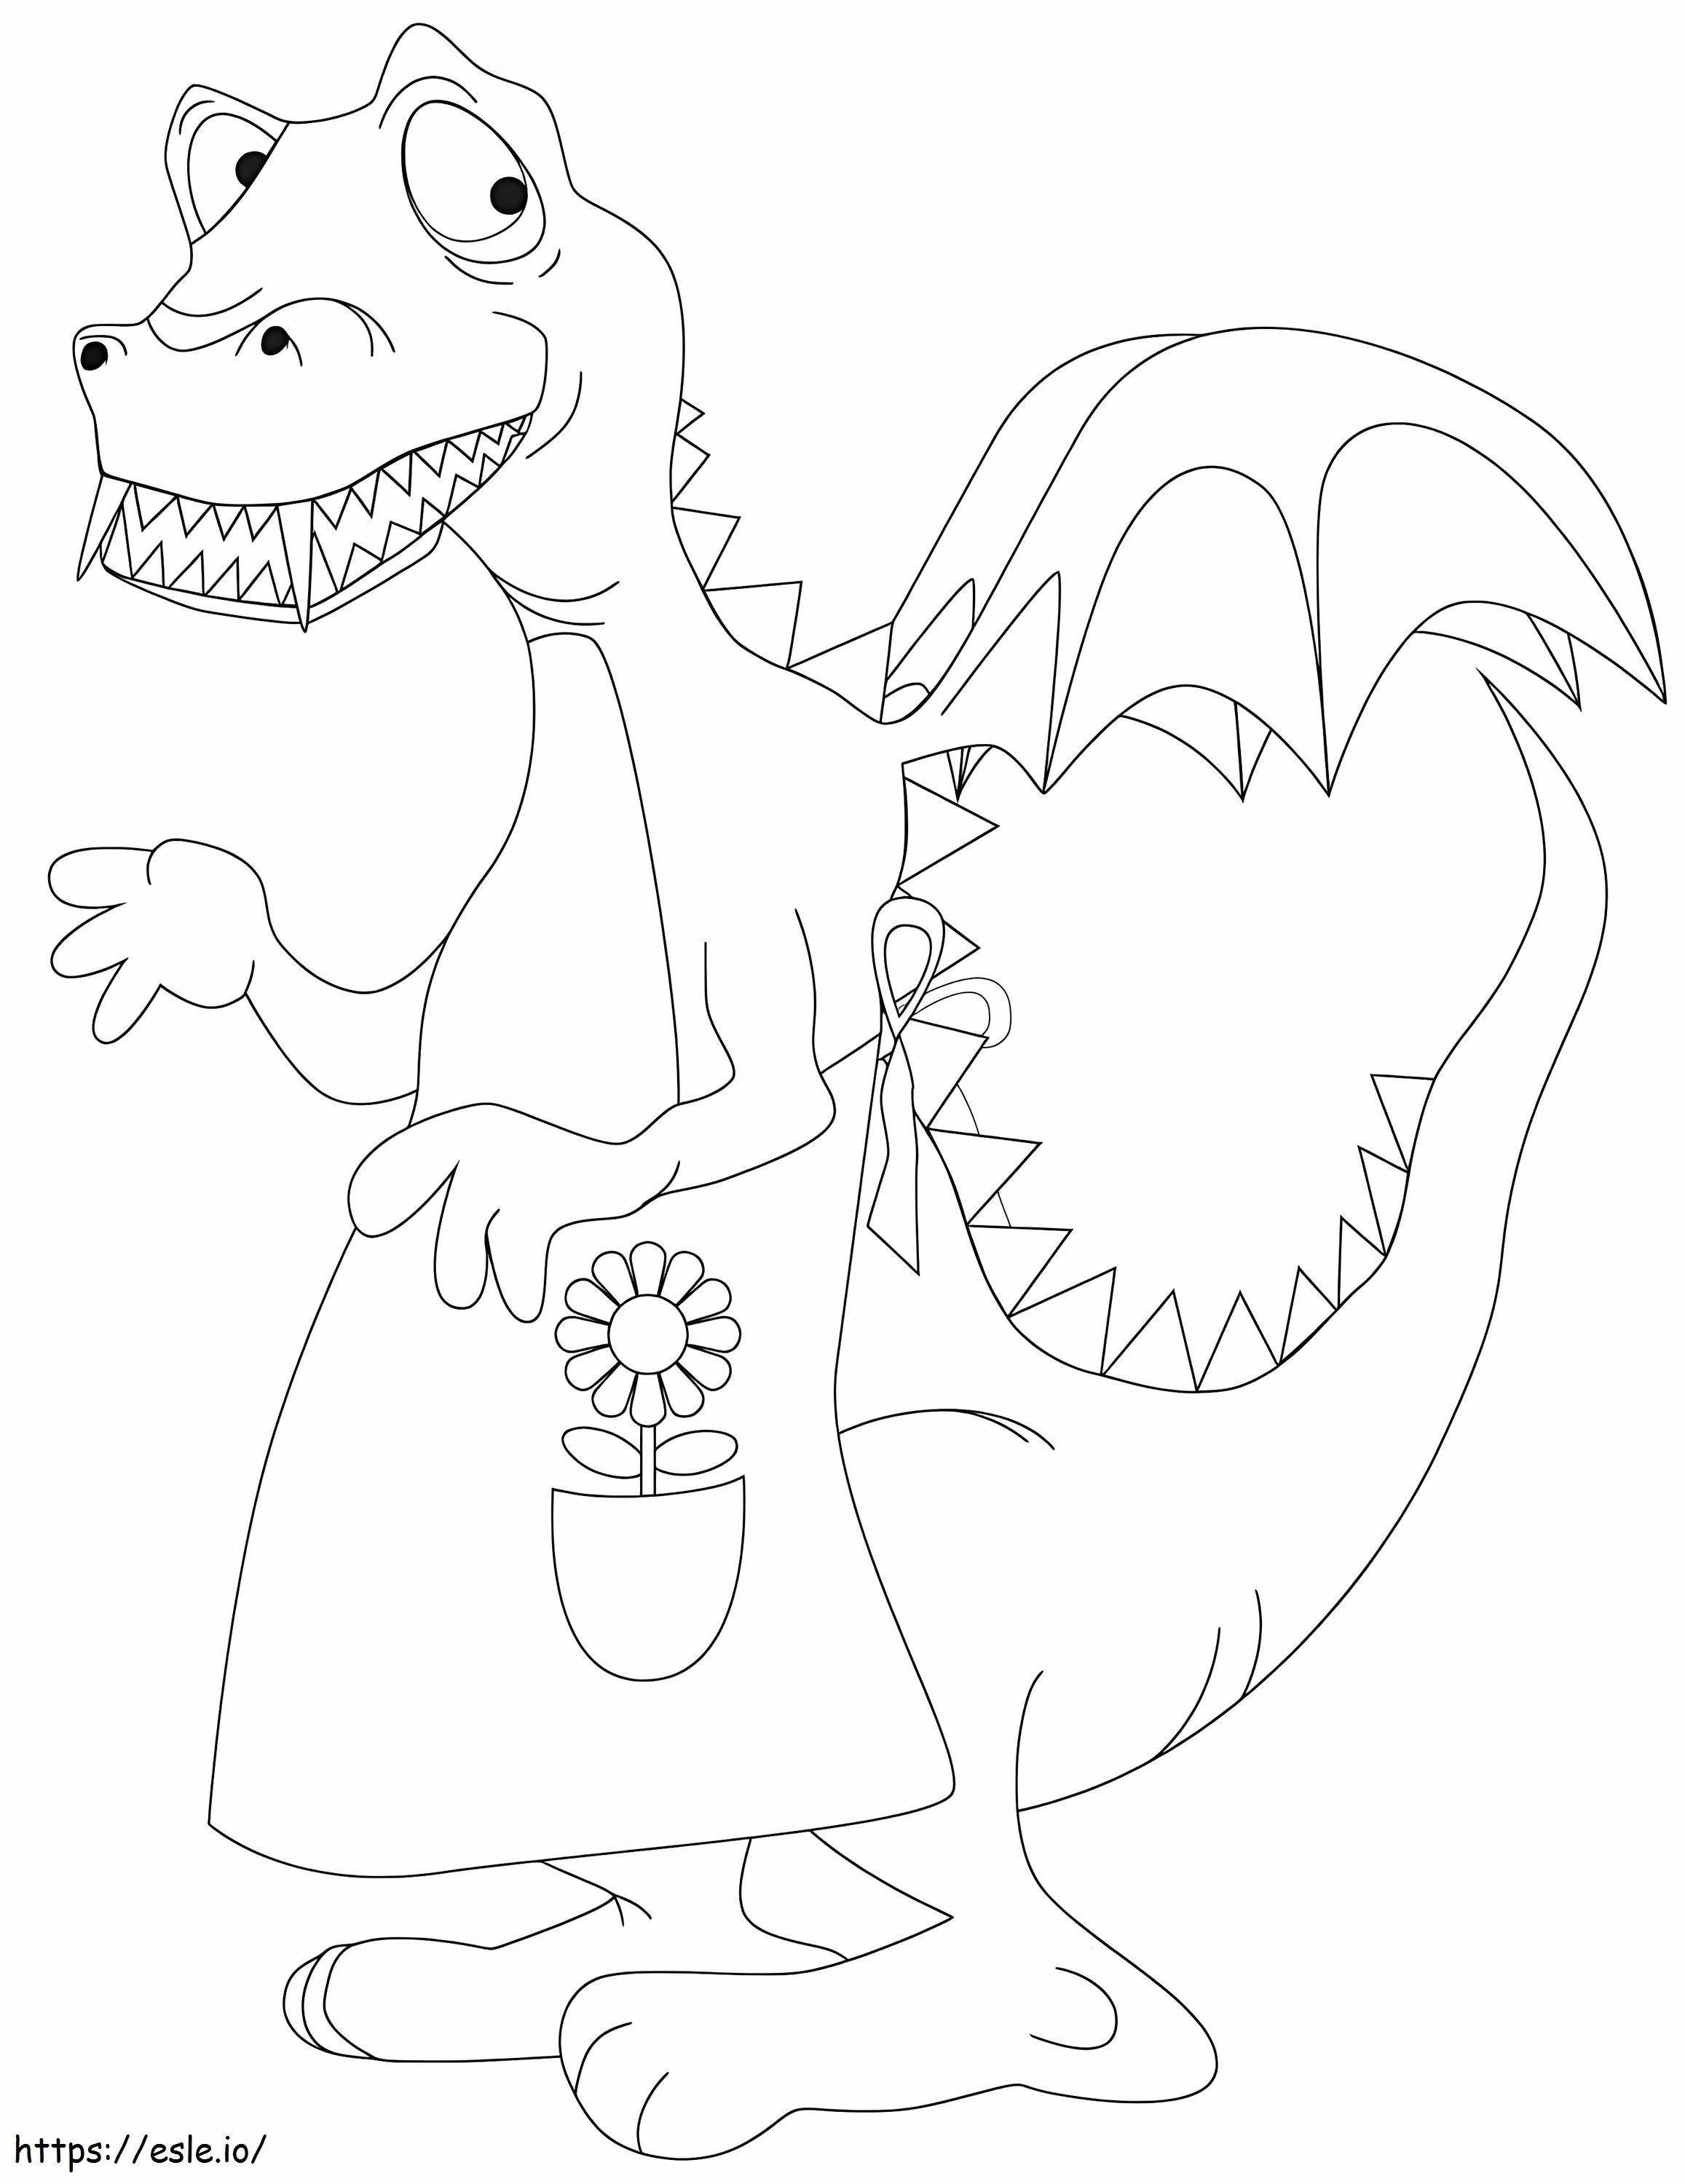 Mother Dragon coloring page